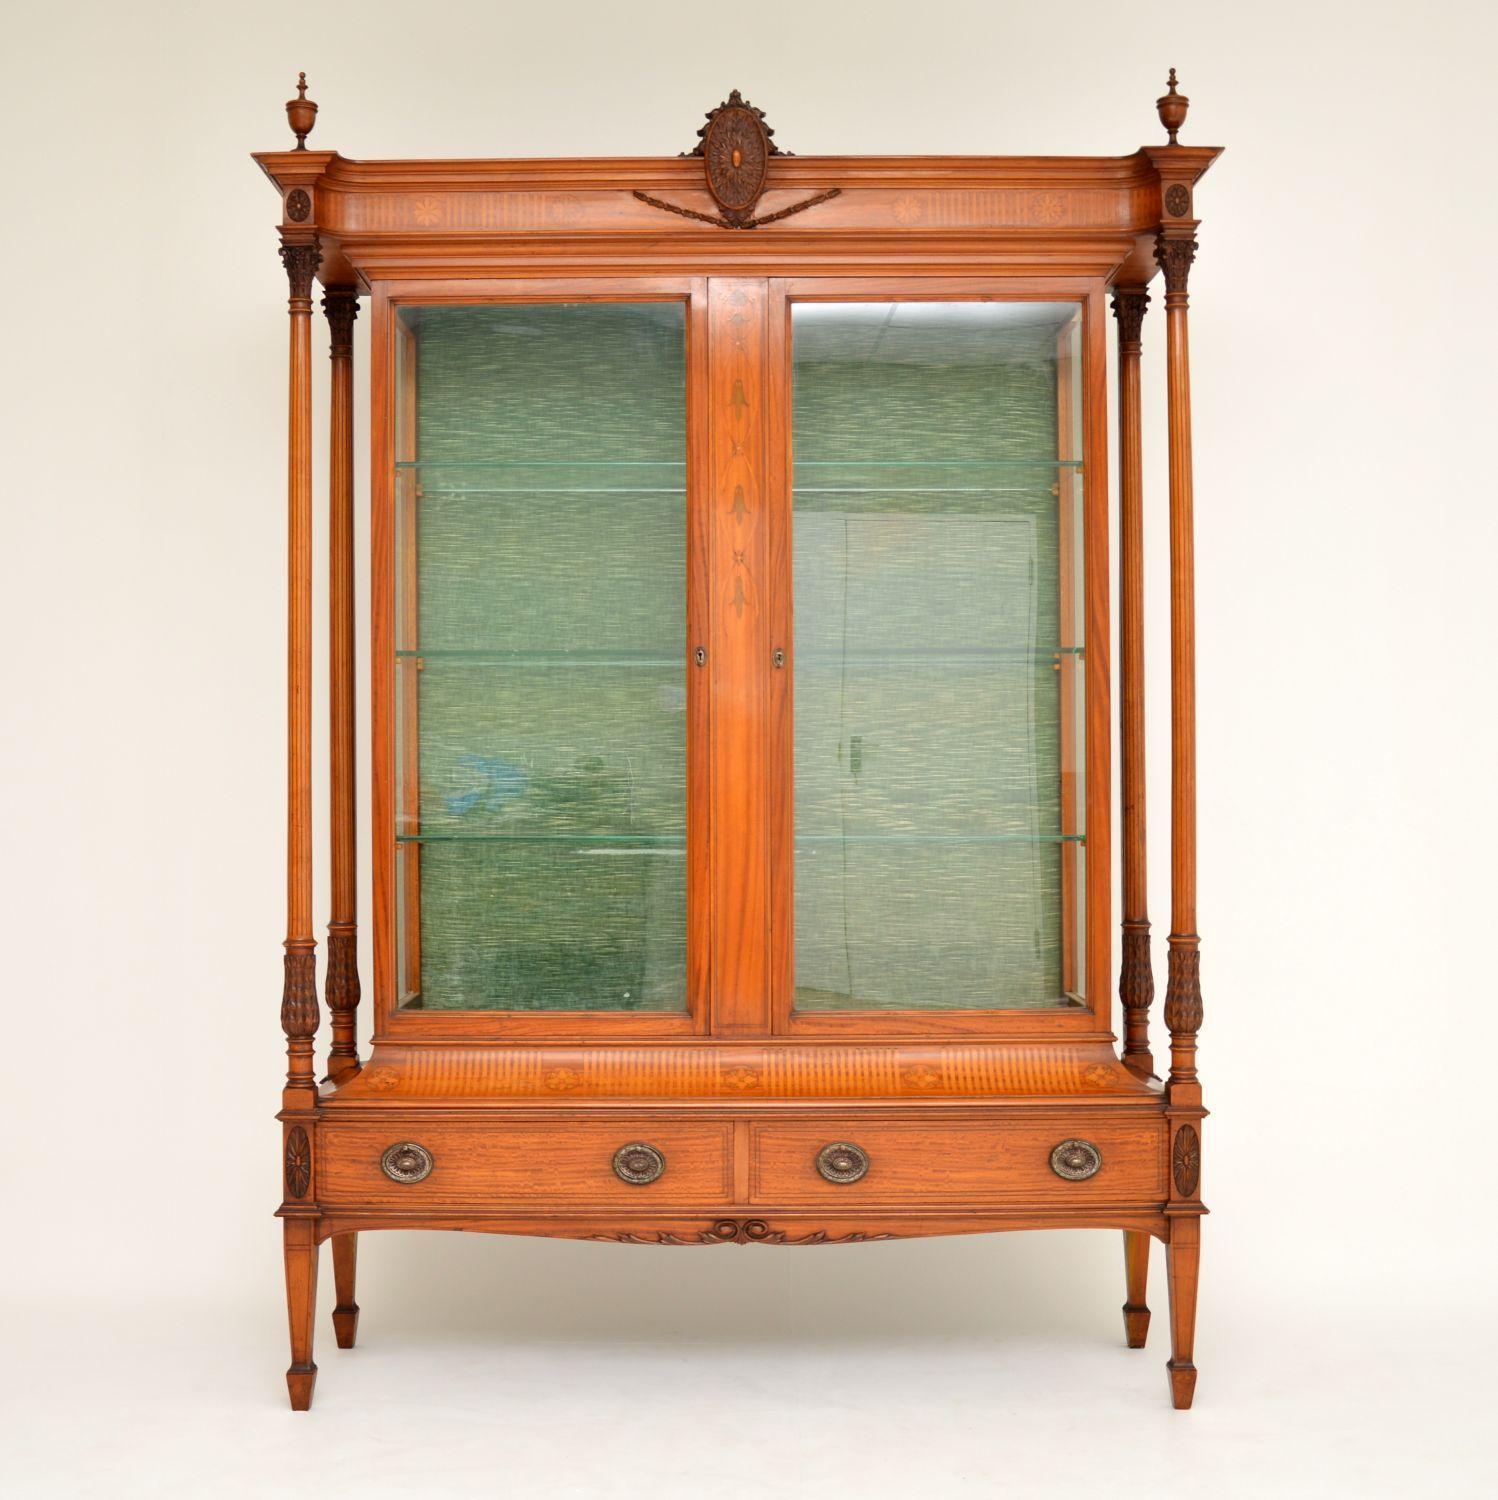 This large antique satinwood display cabinet is the finest quality I have ever come across and is in excellent original condition.

Please enlarge all the images to see all the amazing features, including the very fine carvings on the top central